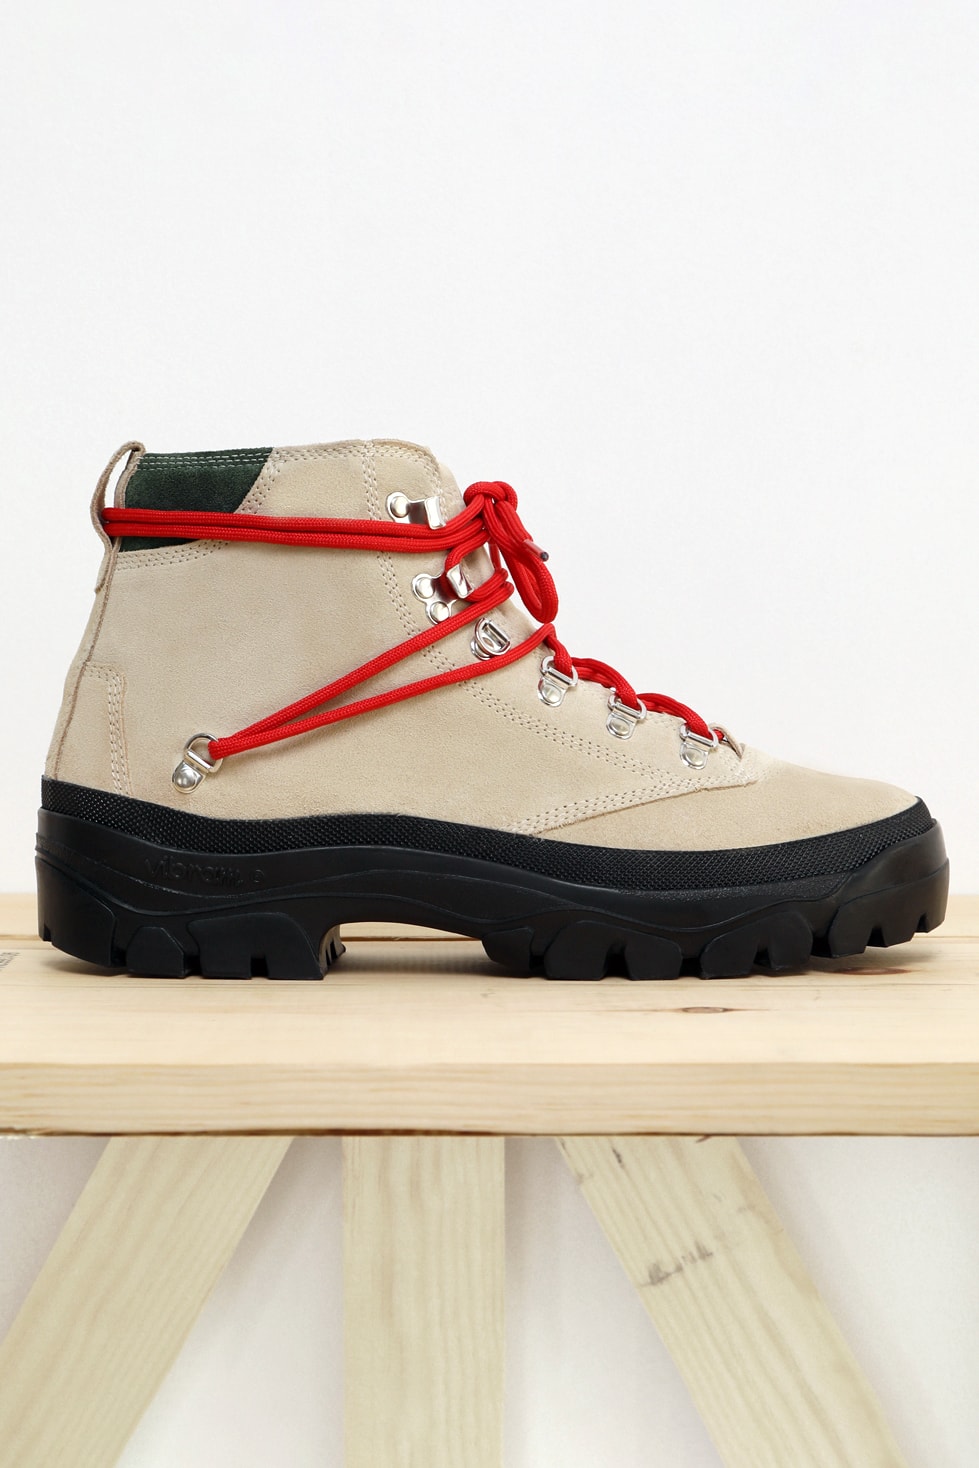 Reese Cooper Fall/Winter 2021 Wilson Hiking Boot fw21 shoe footwear collection vibram